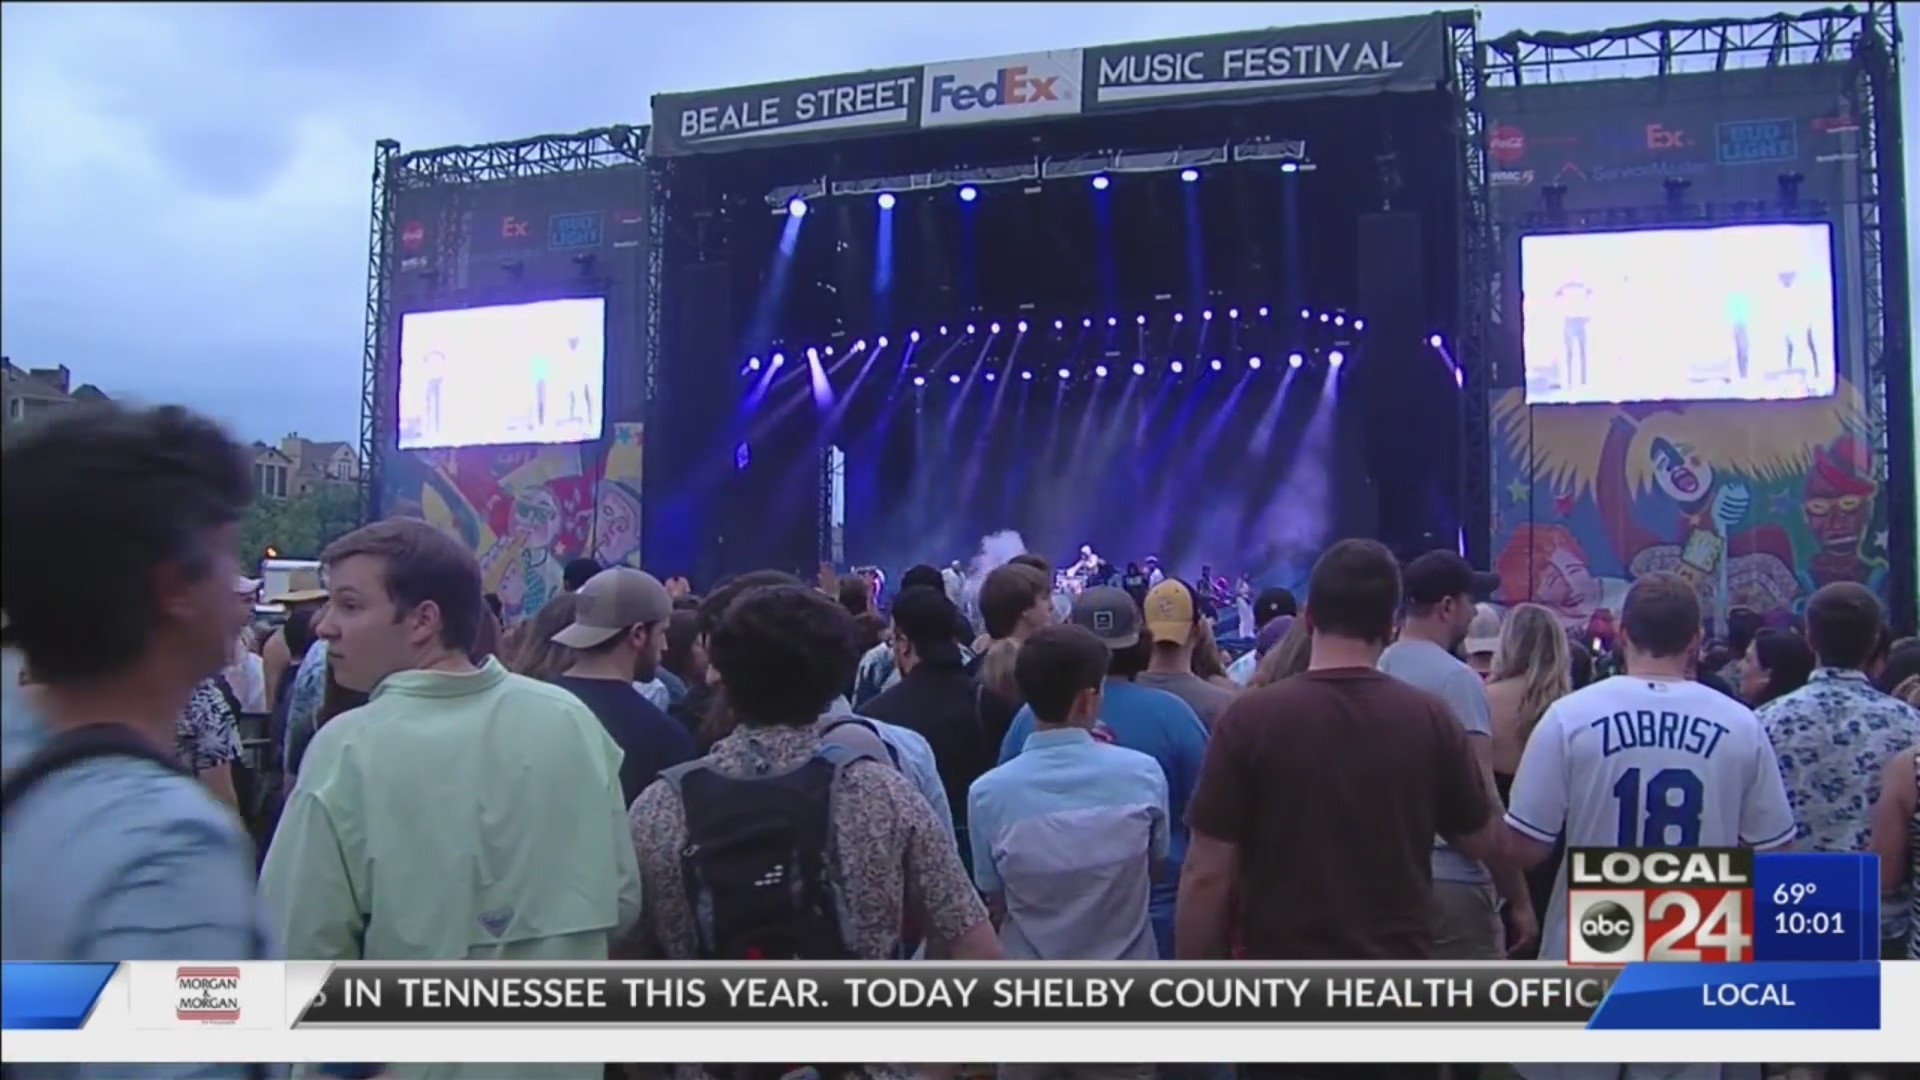 Day 1 of the Beale Street Music Festival entertains thousands at Tom Lee Park in Downtown Memphis